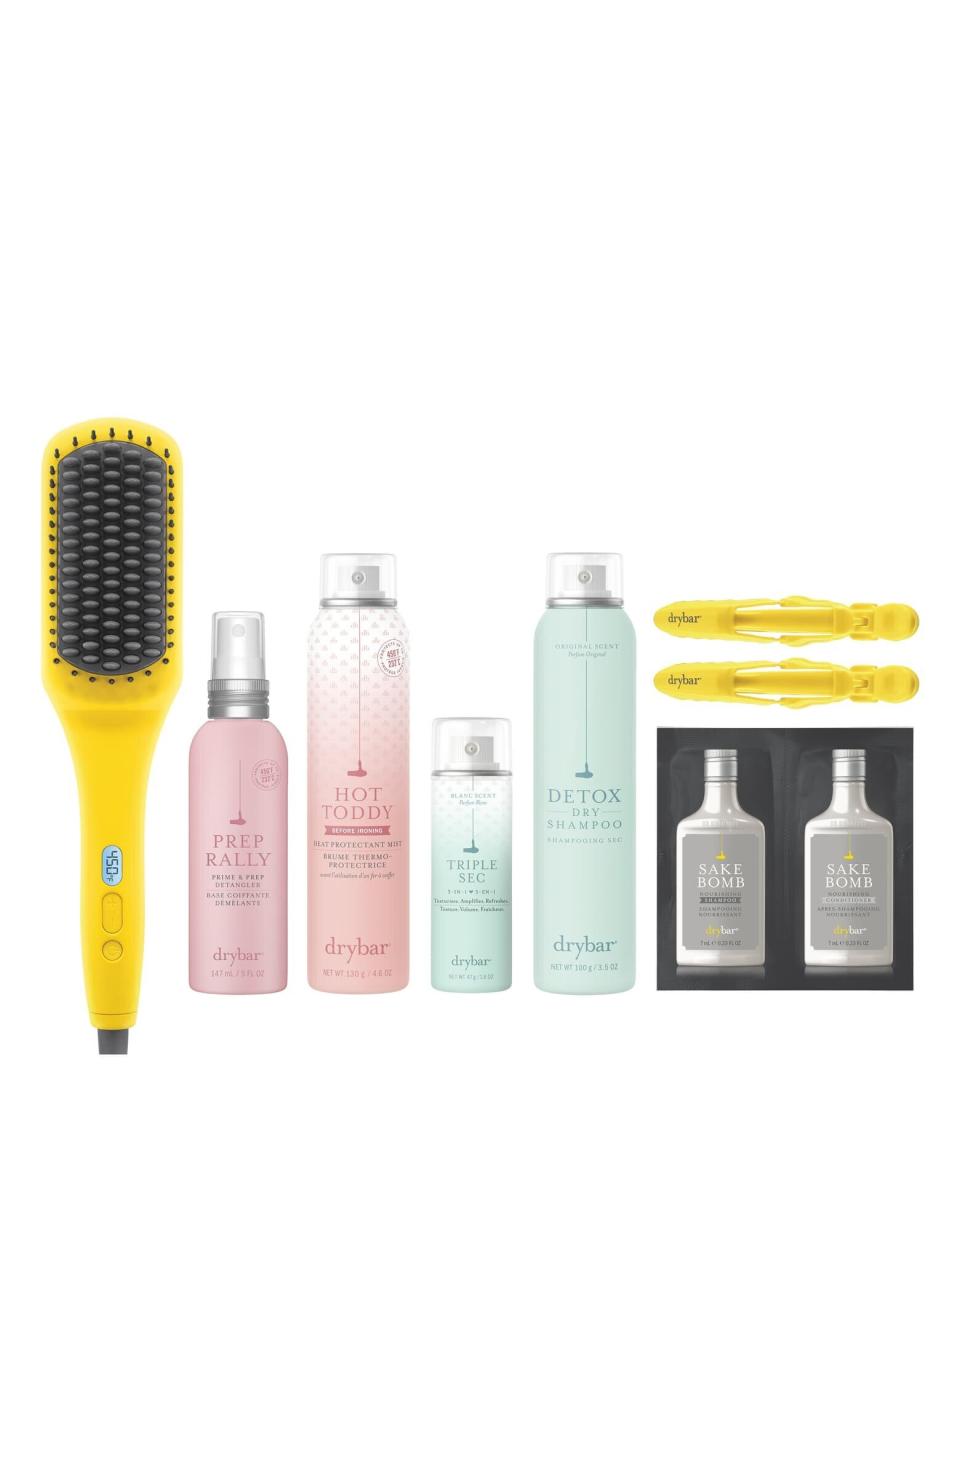 Get a salon-worthy blowout from home with this Dry Bar kit.&nbsp;<strong><a href="https://fave.co/32B3zSN" target="_blank" rel="noopener noreferrer">Normally $238, get it on sale for $165 during the Nordstrom Anniversary Sale</a>.</strong>